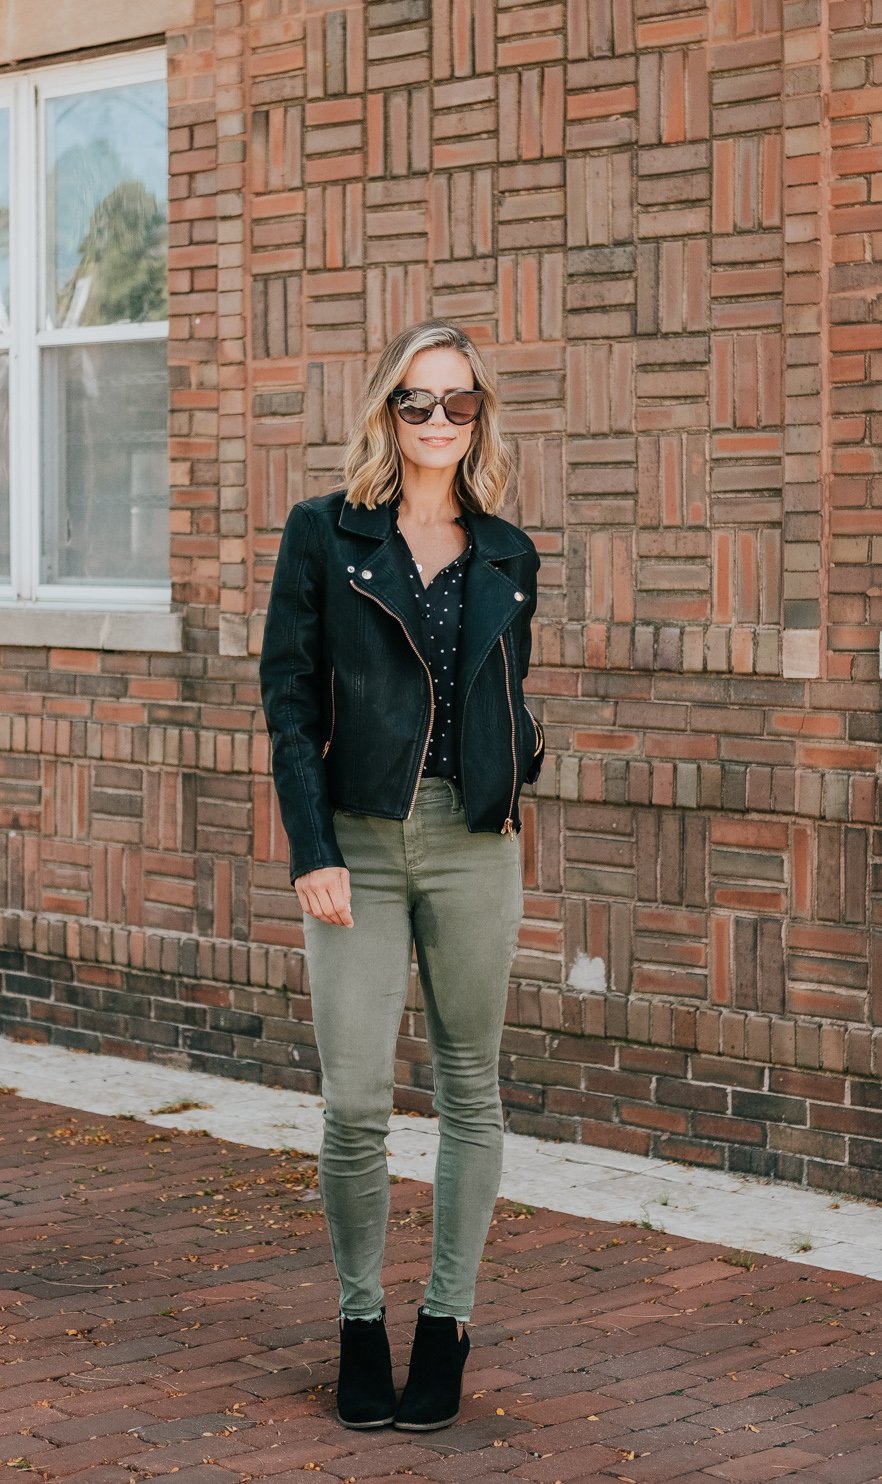 Budget friendly style: olive pants, polka dot blouse, moto jacket, booties, and sunglasses